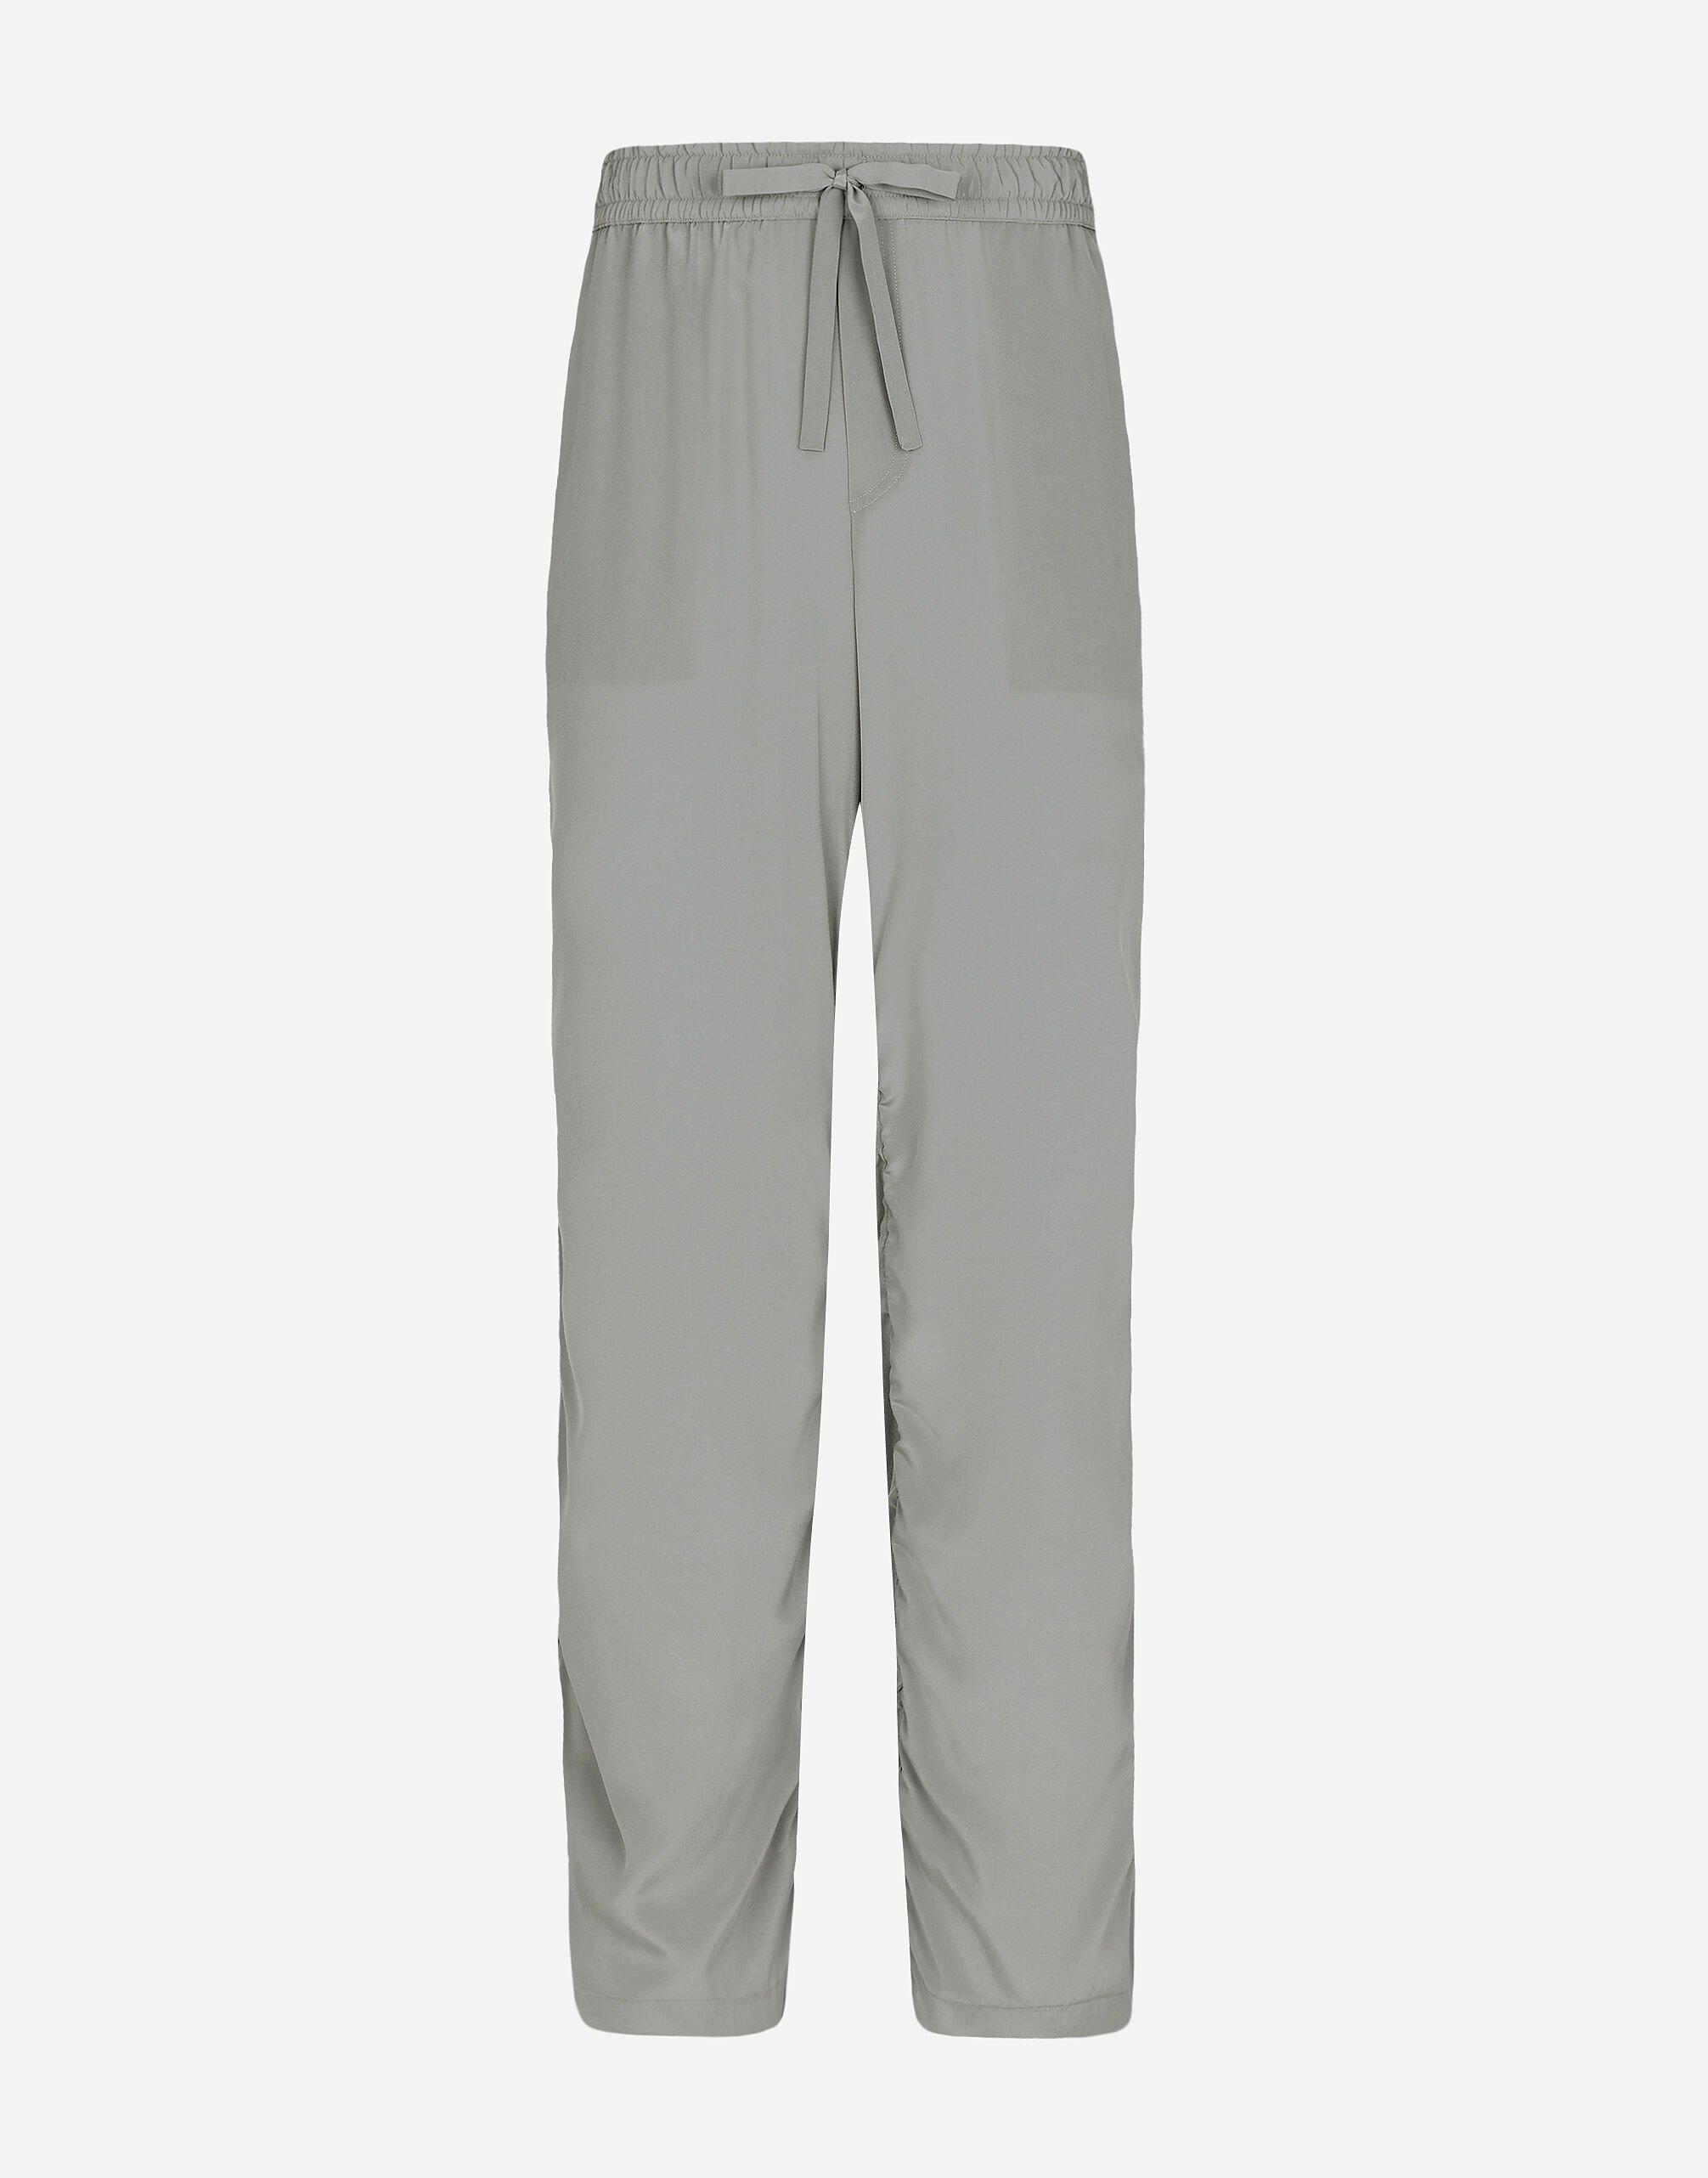 Dolce & Gabbana Silk jogging pants with gathered detailing White GY6IETGG868